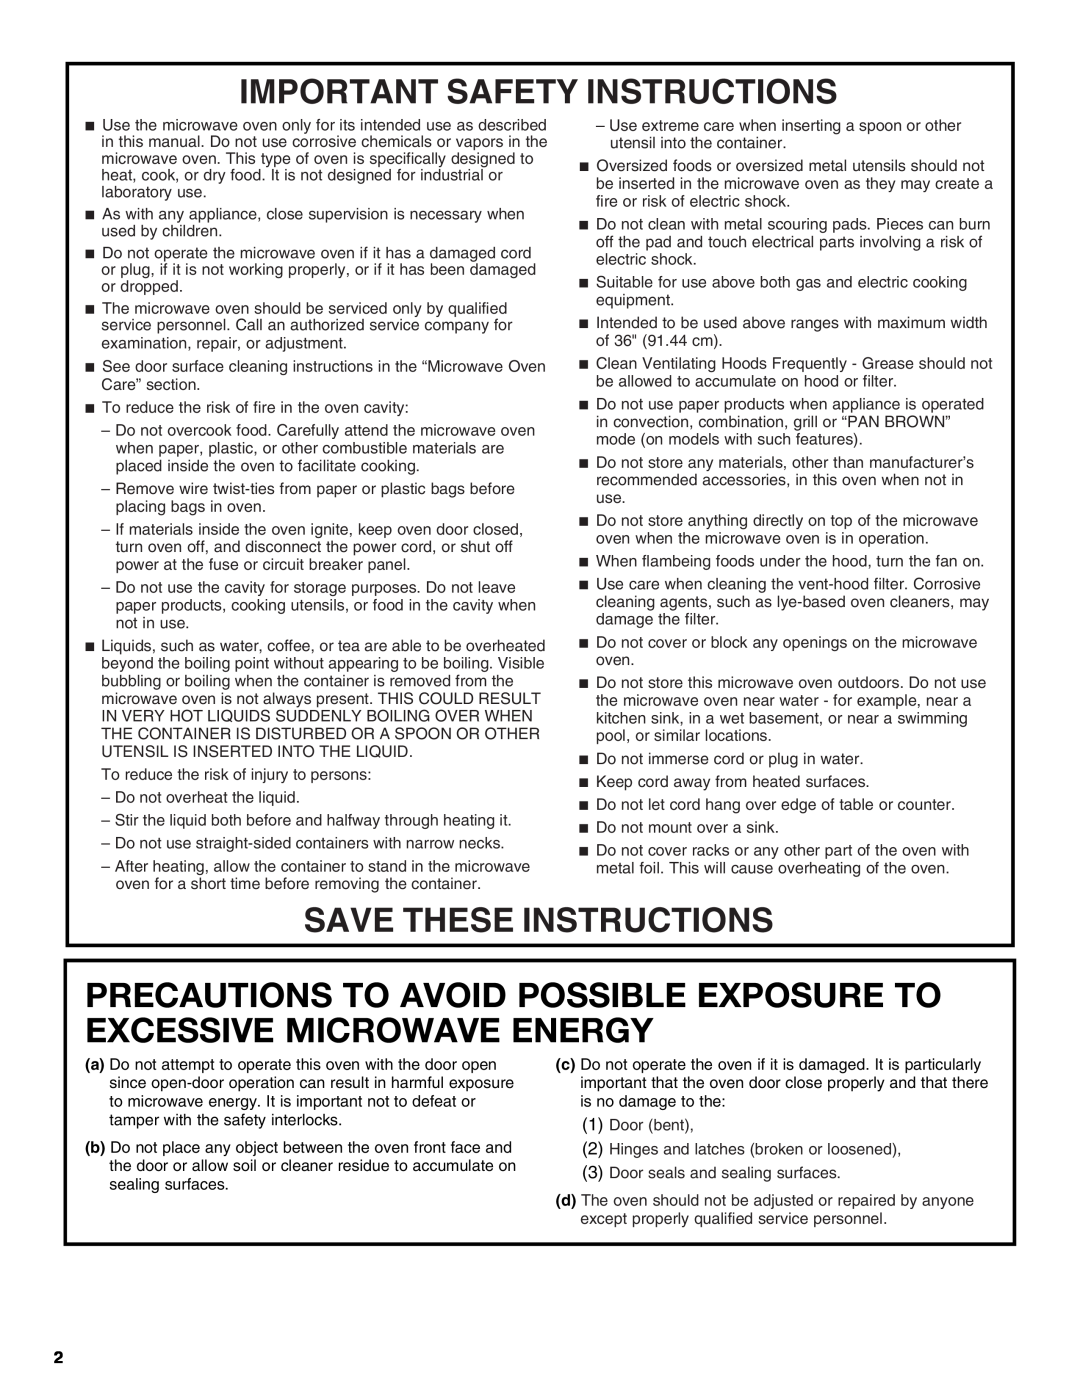 Jenn-Air W10285189B Precautions To Avoid Possible Exposure To Excessive Microwave Energy, Important Safety Instructions 